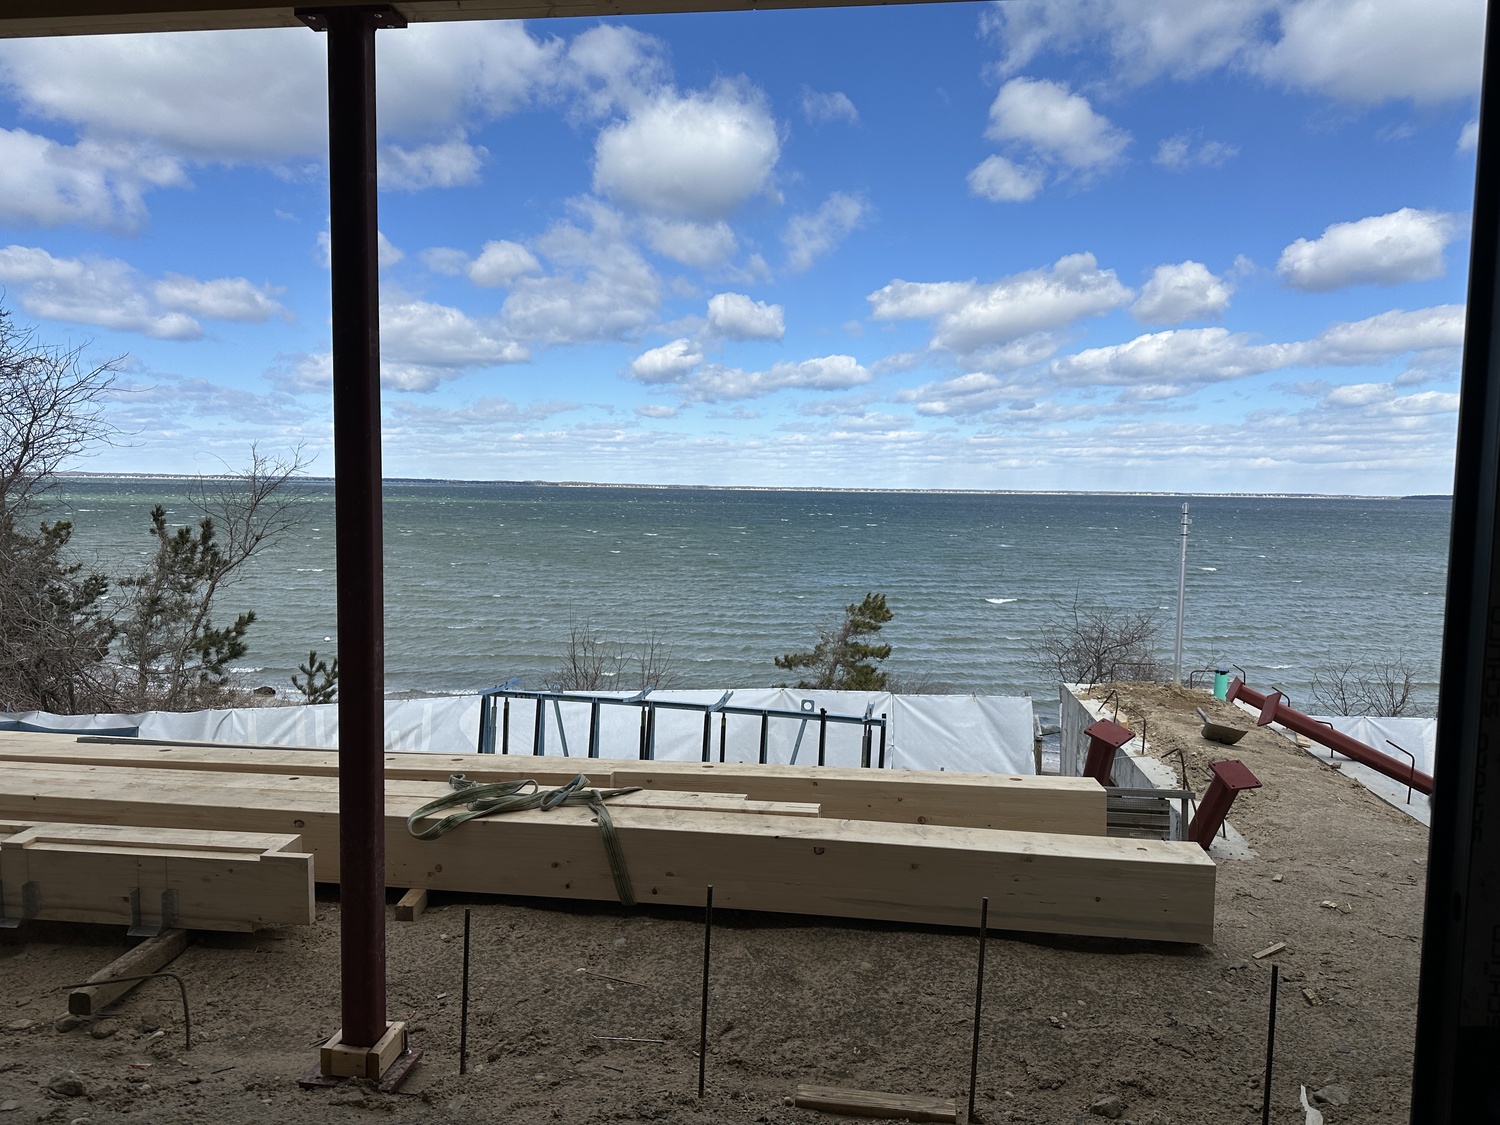 The view from inside the Hampton Bays home. BRENDAN J. O'REILLY